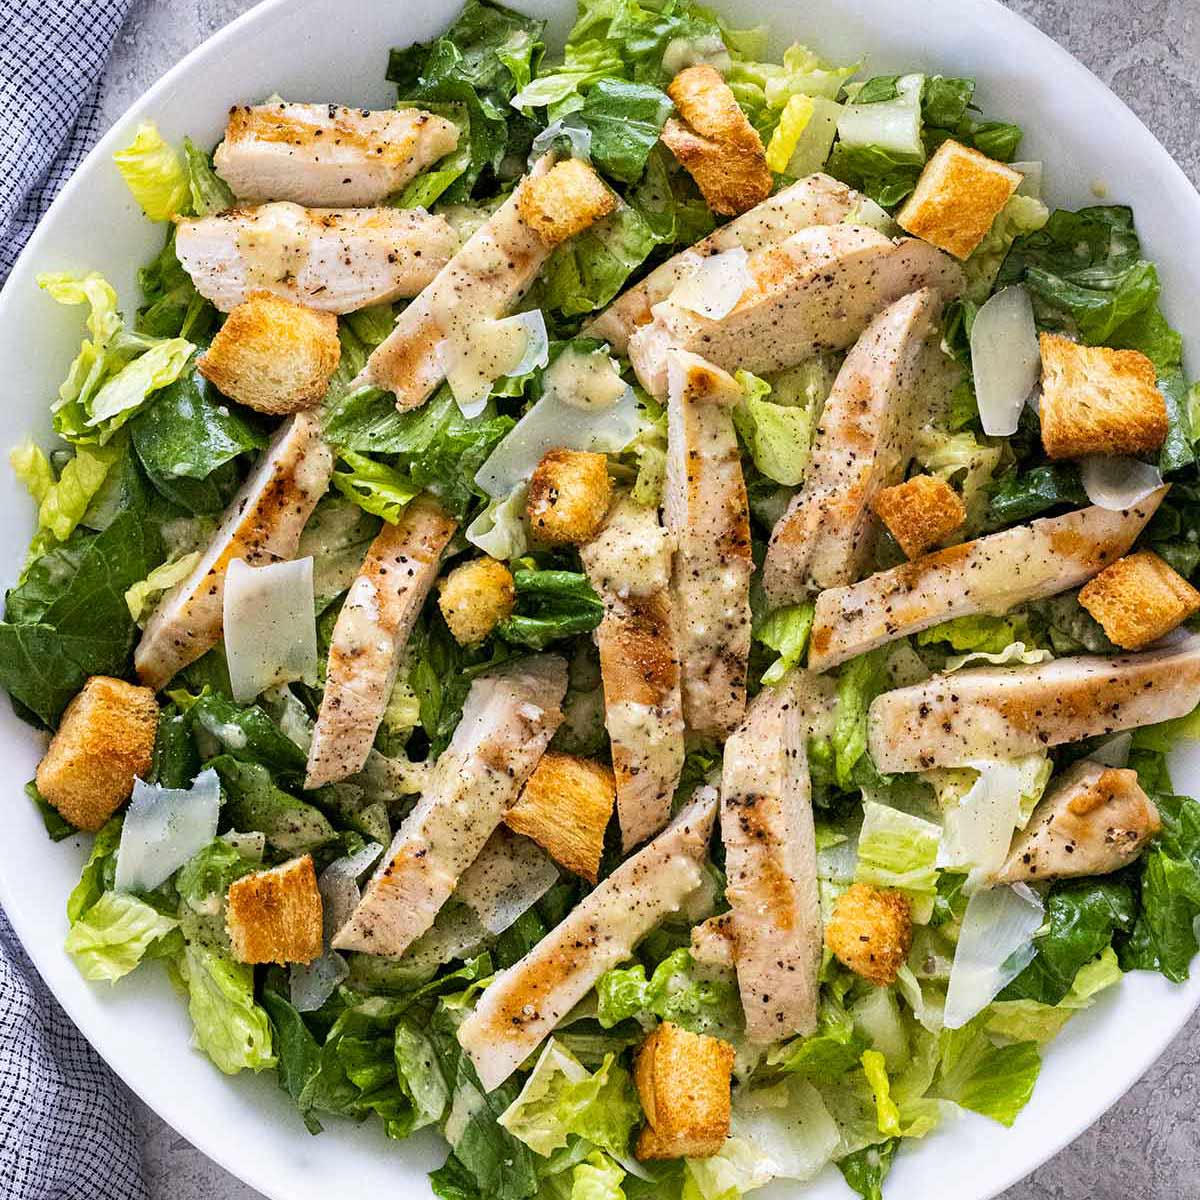 How to Make Chicken Caesar Salad from Scratch [Video]